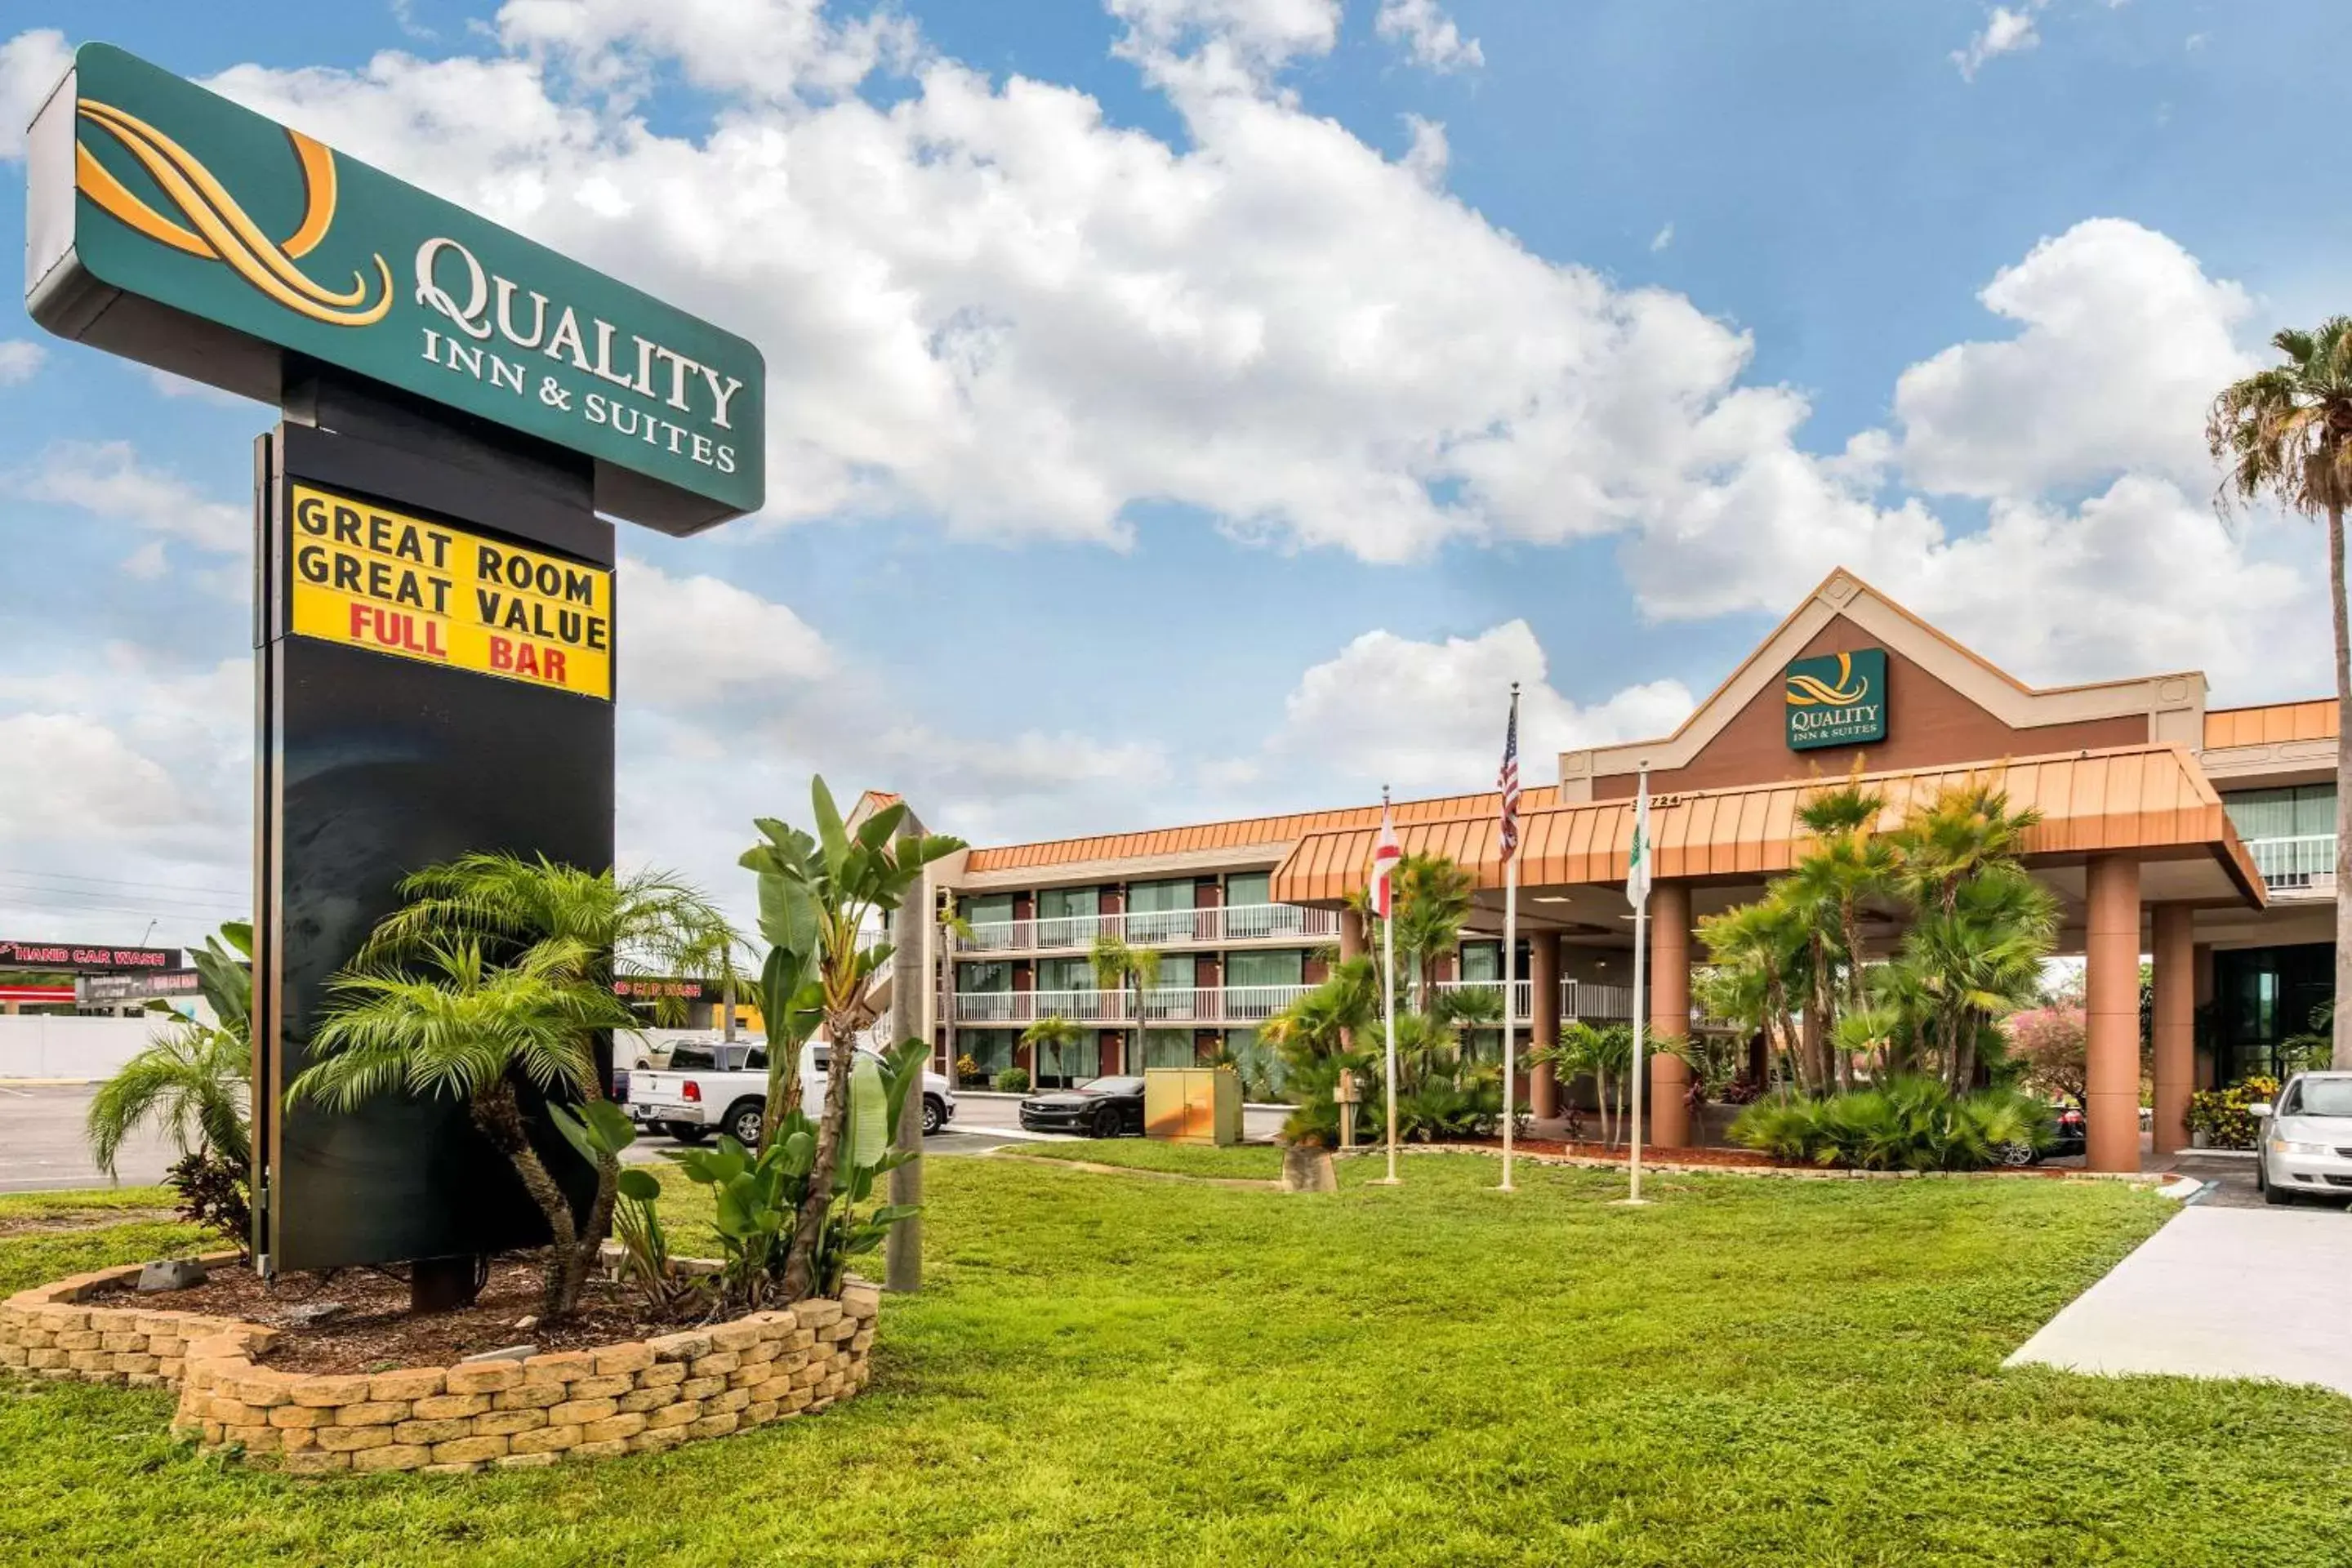 Property Building in Quality Inn & Suites Tarpon Springs South